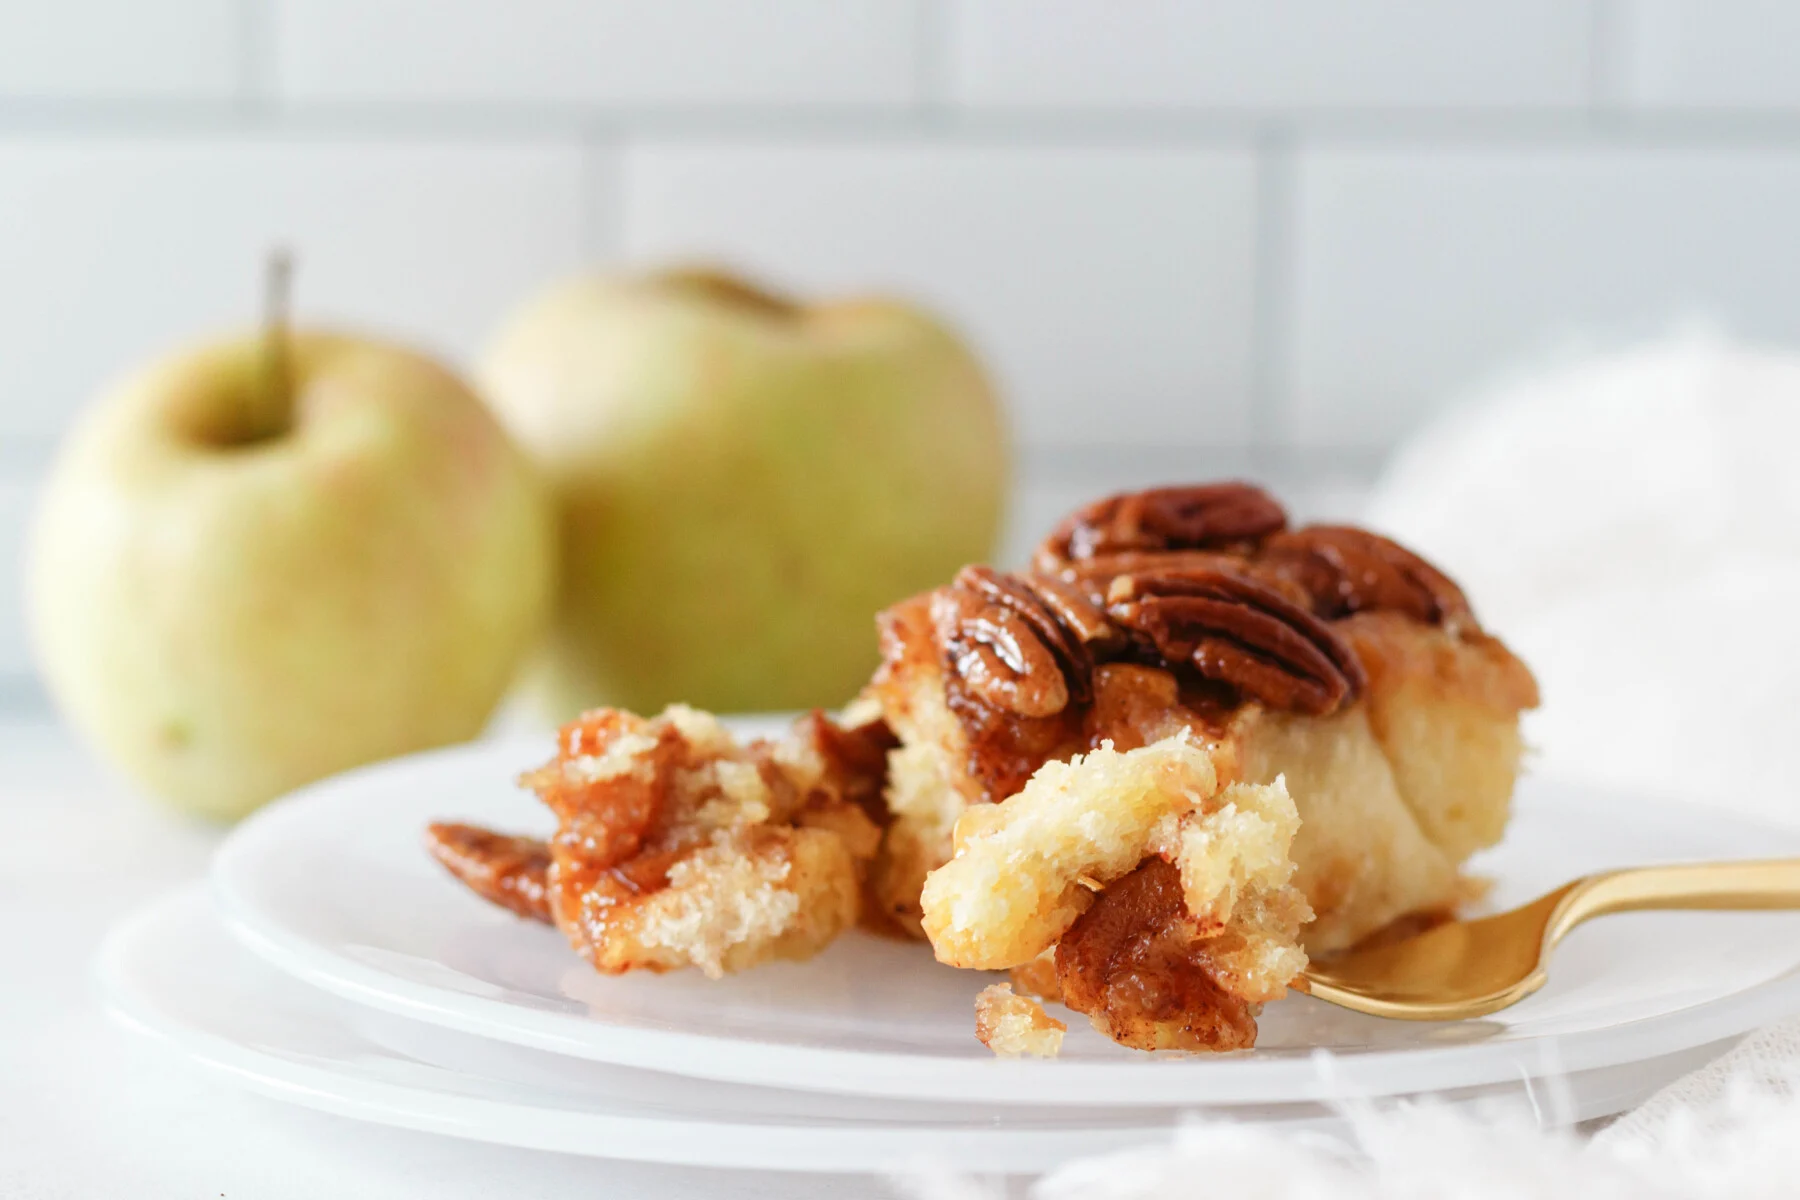 horizontal image of an apple sticky bun on a plate. There's a portion torn out of the bun for a closer look at the final texture and baked filling